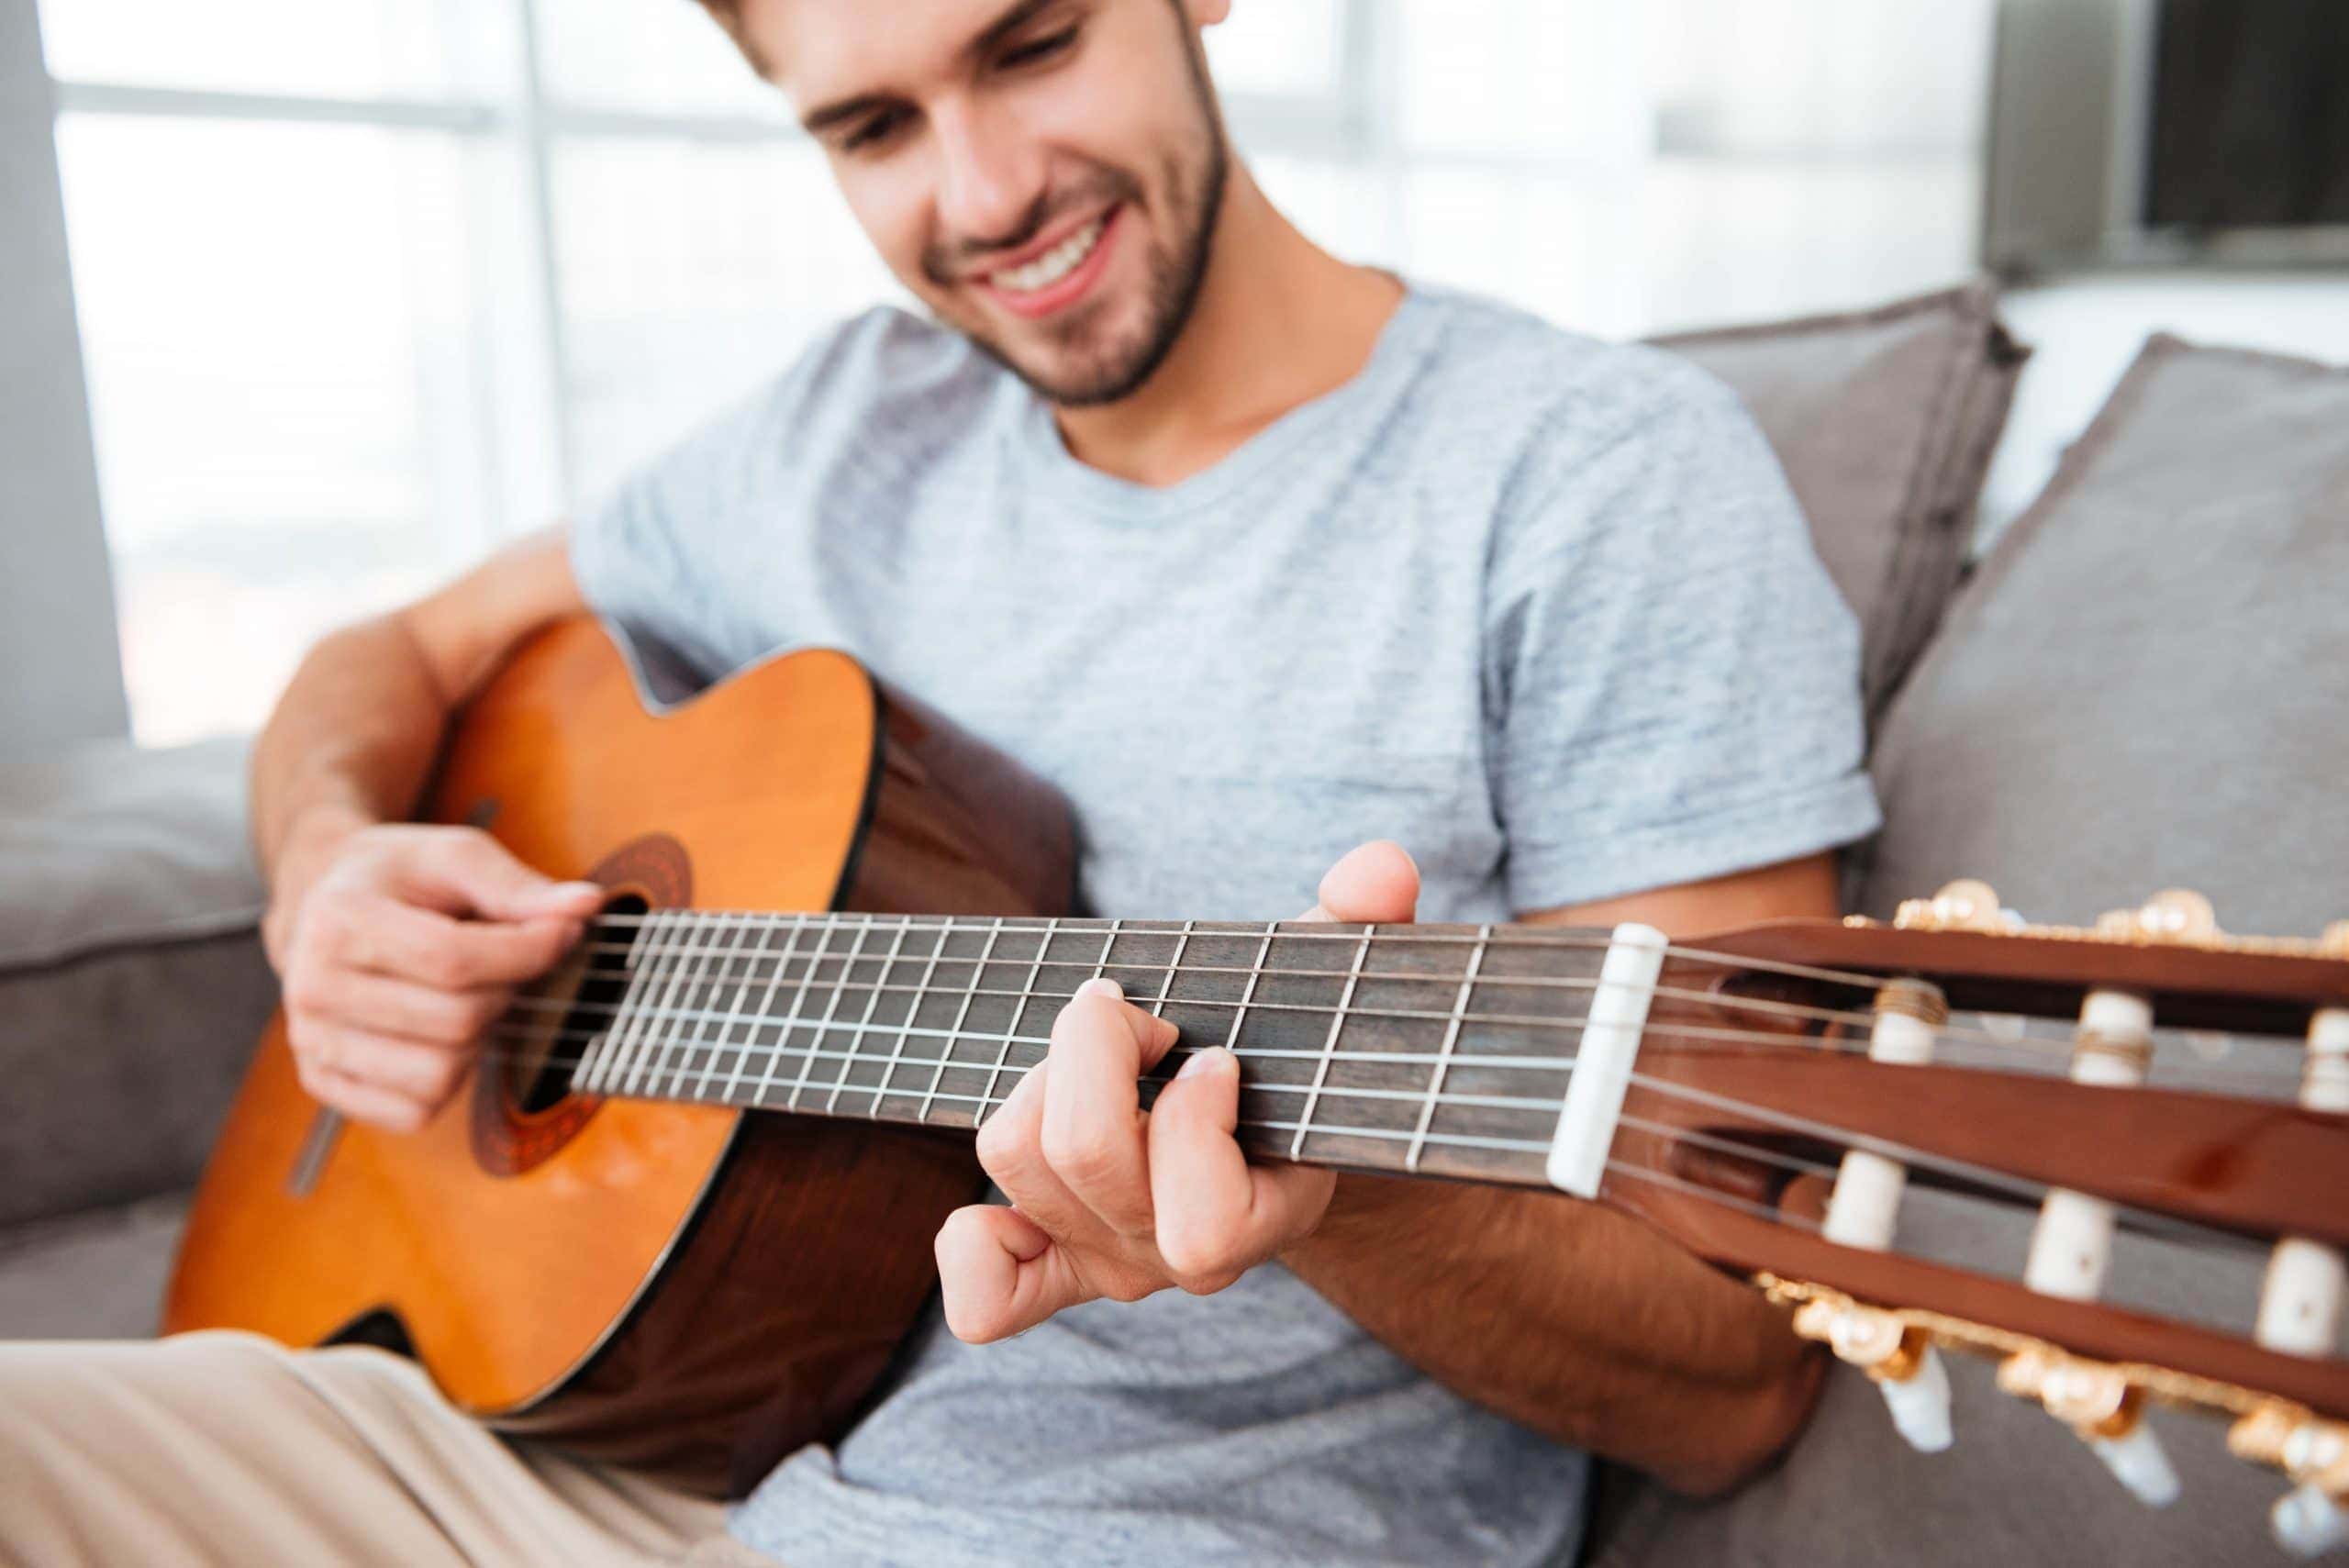 How To Hold An Acoustic Guitar